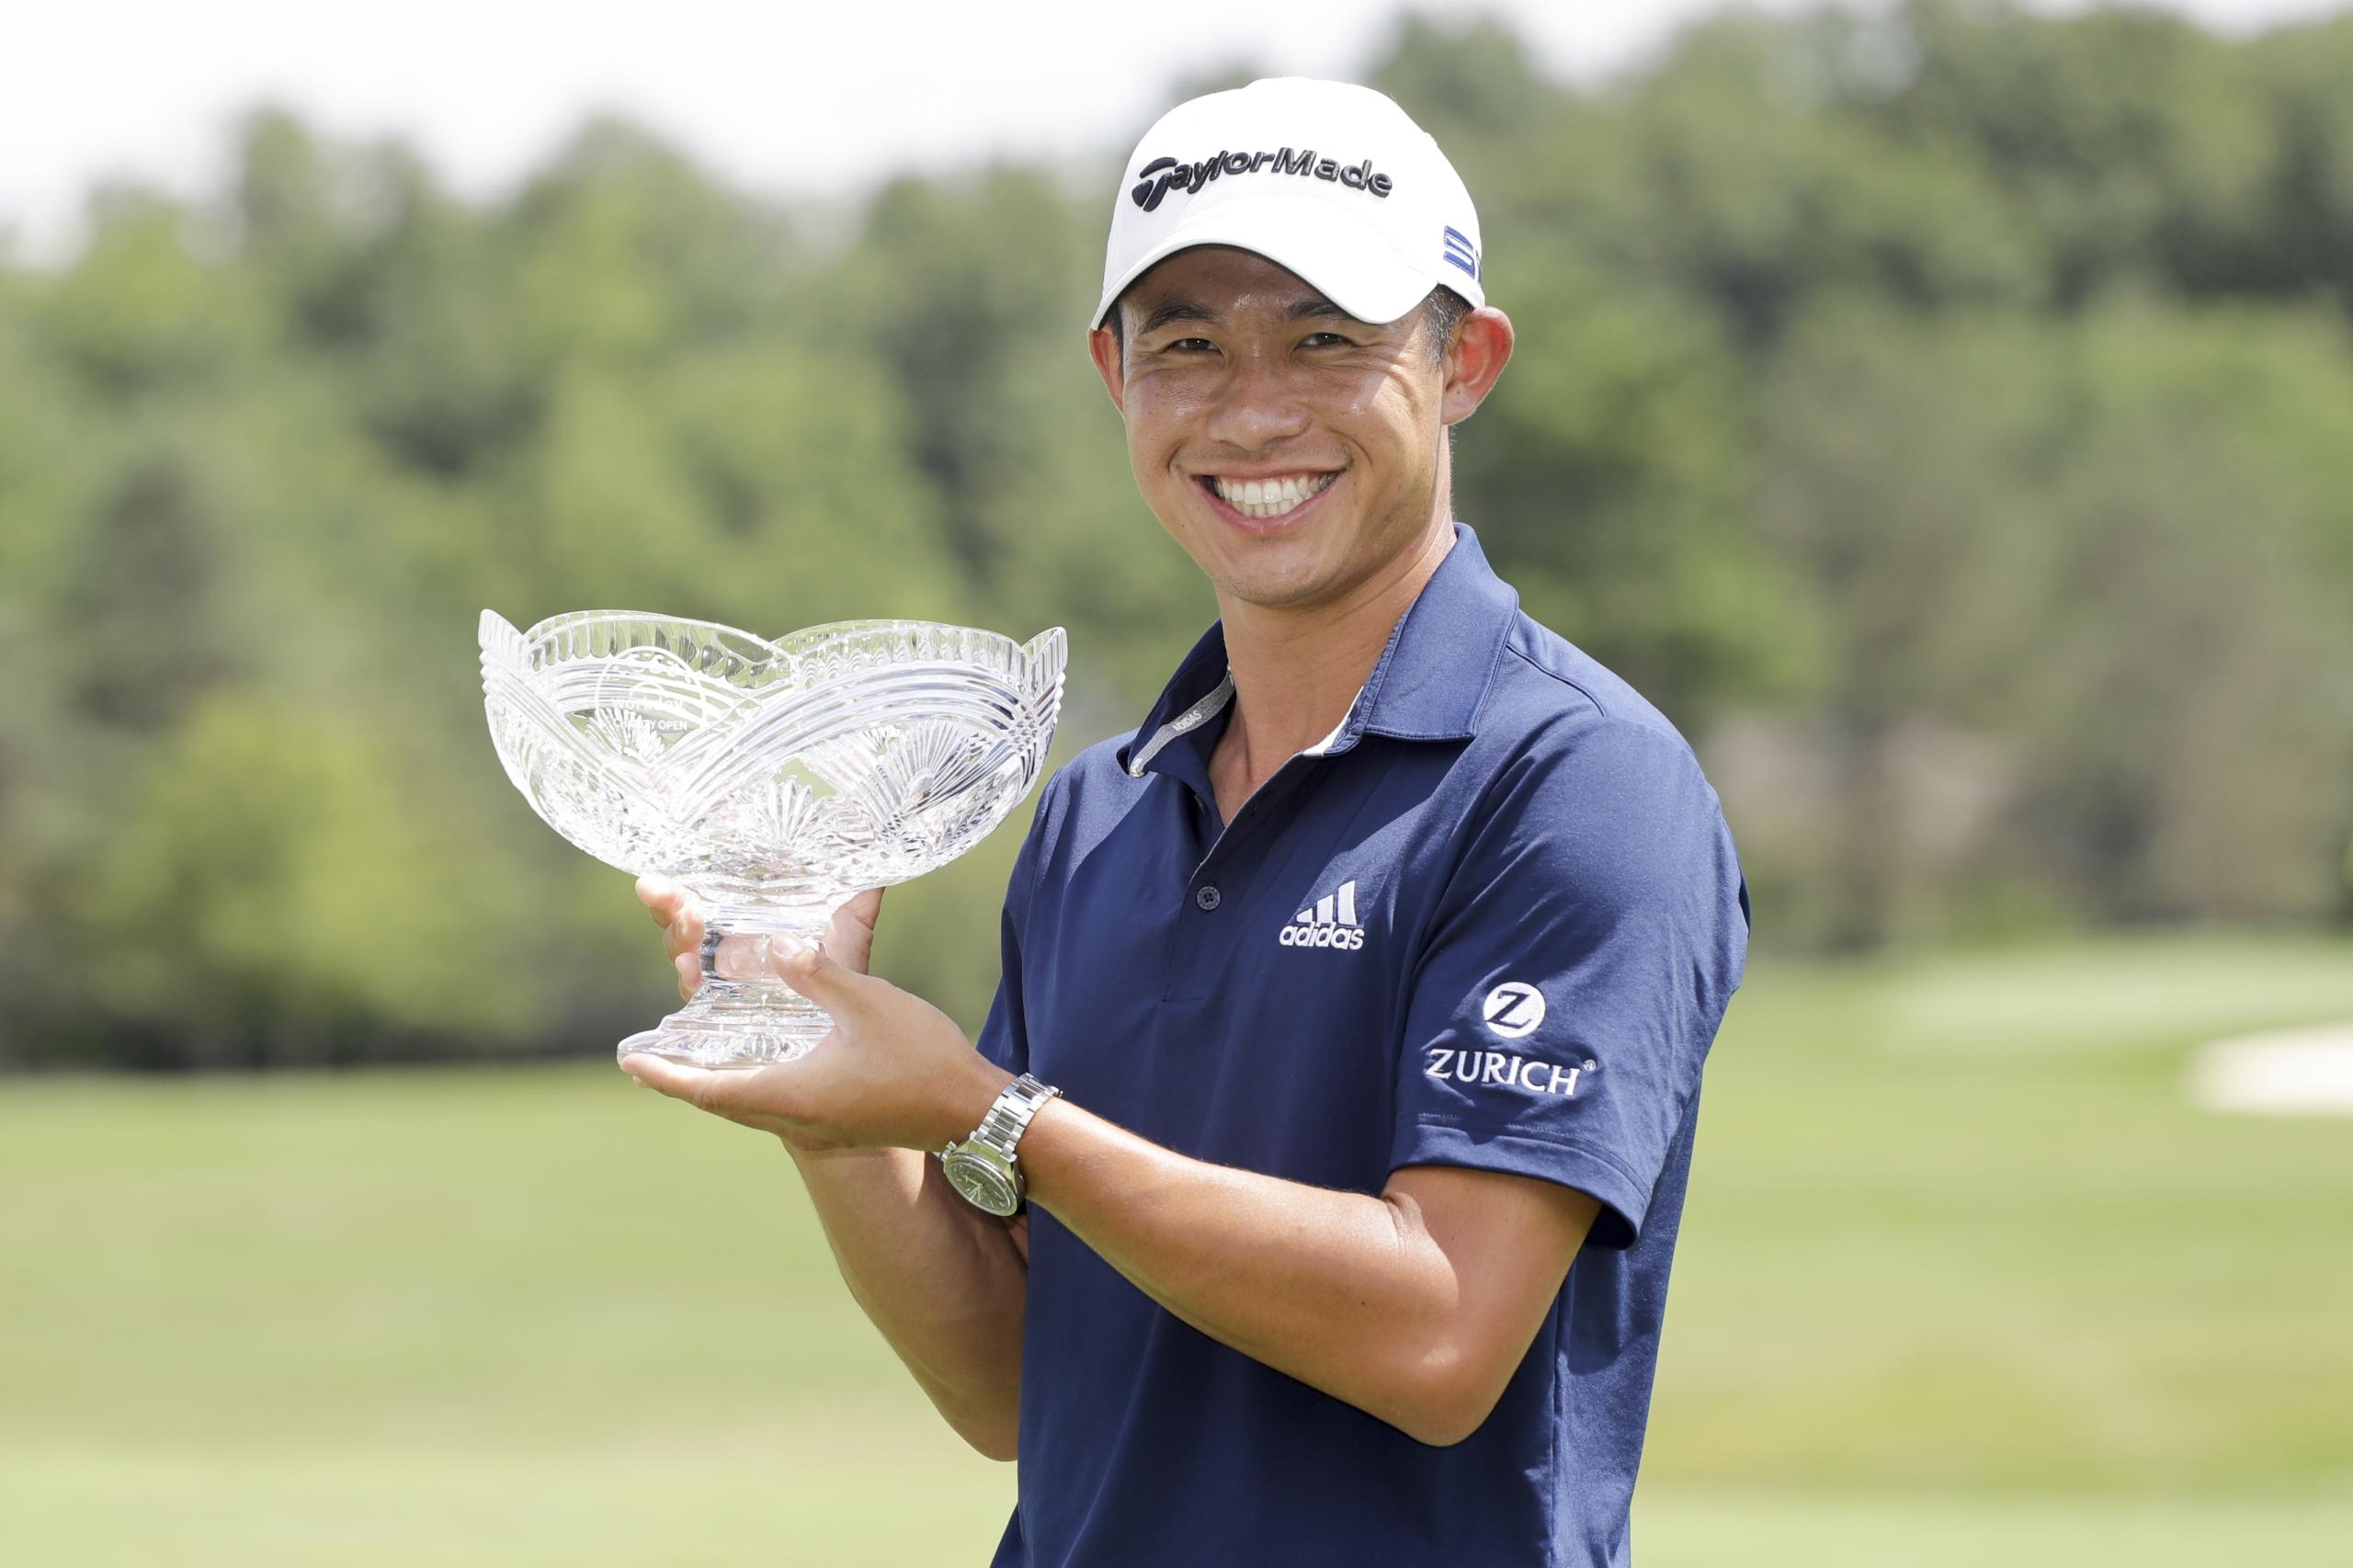 Collin Morikawa holds his trophy after winning the Workday Charity Open golf tournament, Sunday, July 12, 2020, in Dublin, Ohio.